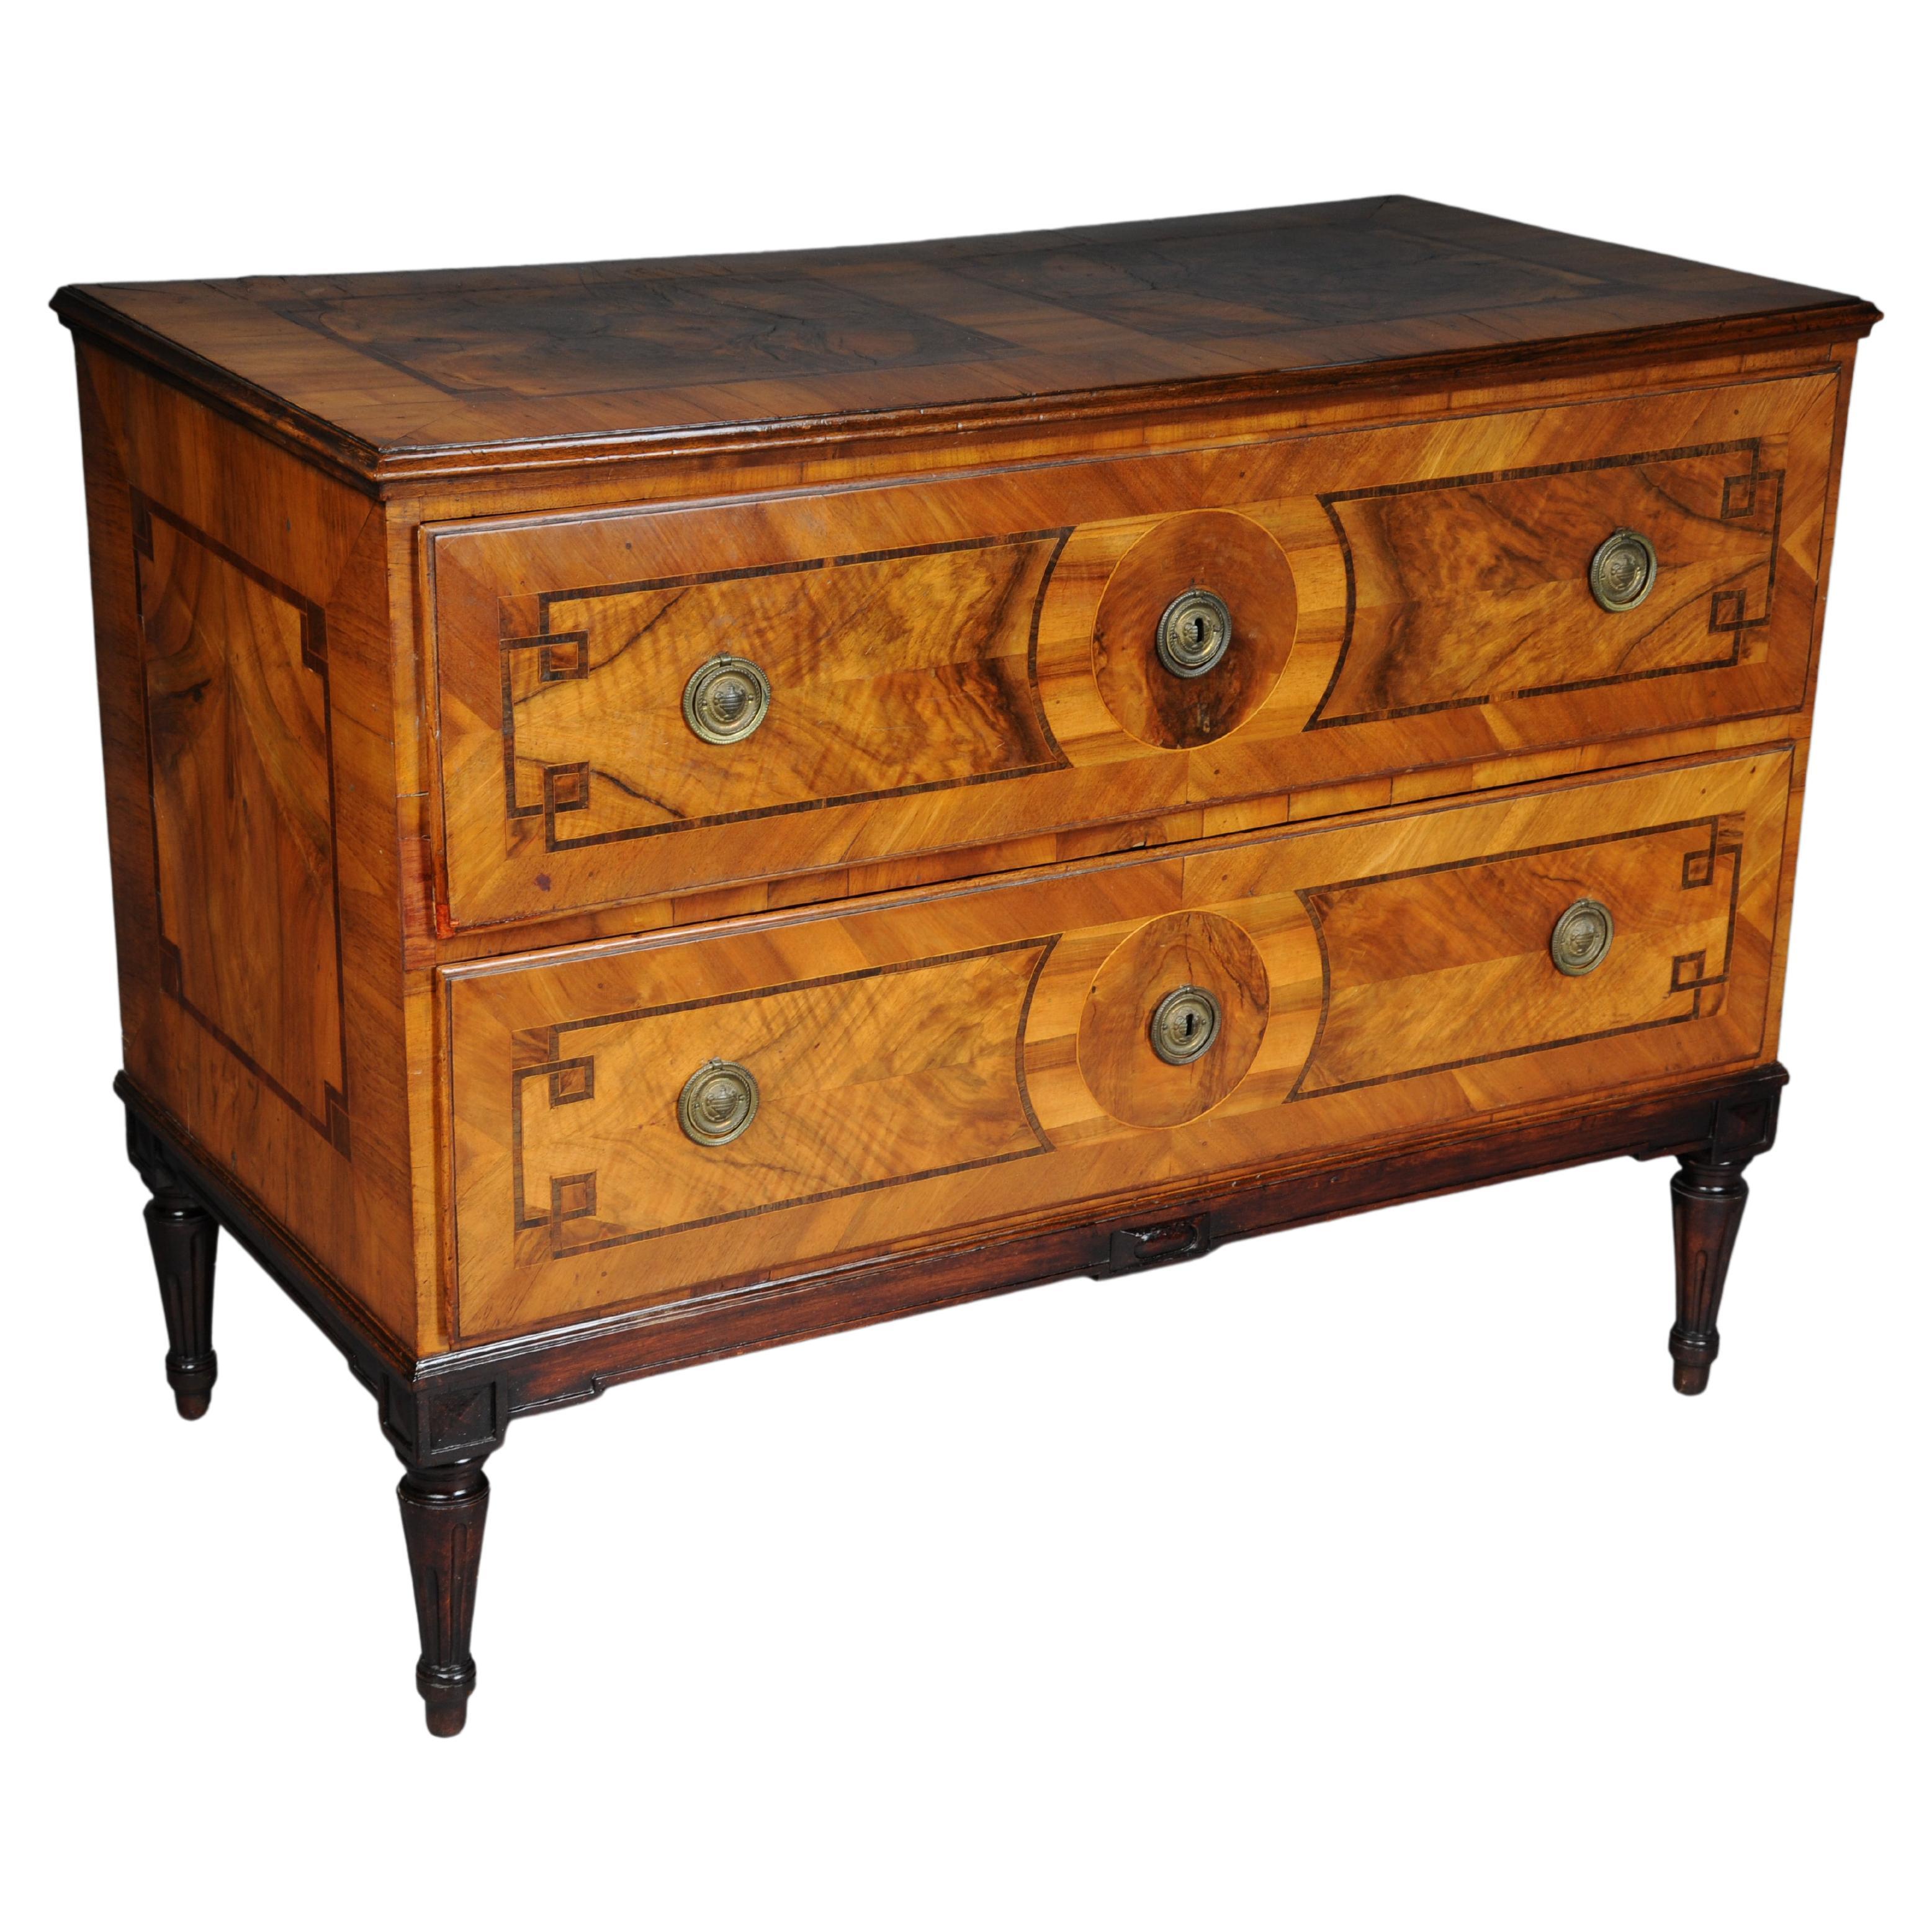 Courtly classical chest of drawers, South German around 1780